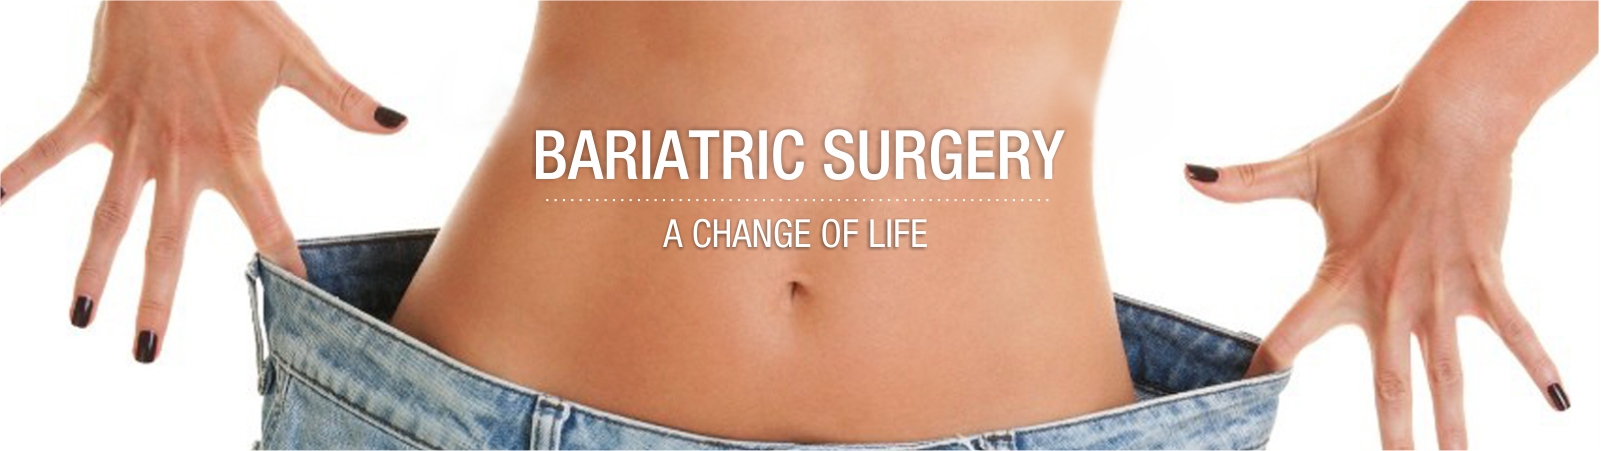 Post Bariatric Surgery Precautions That You Must Adhere To